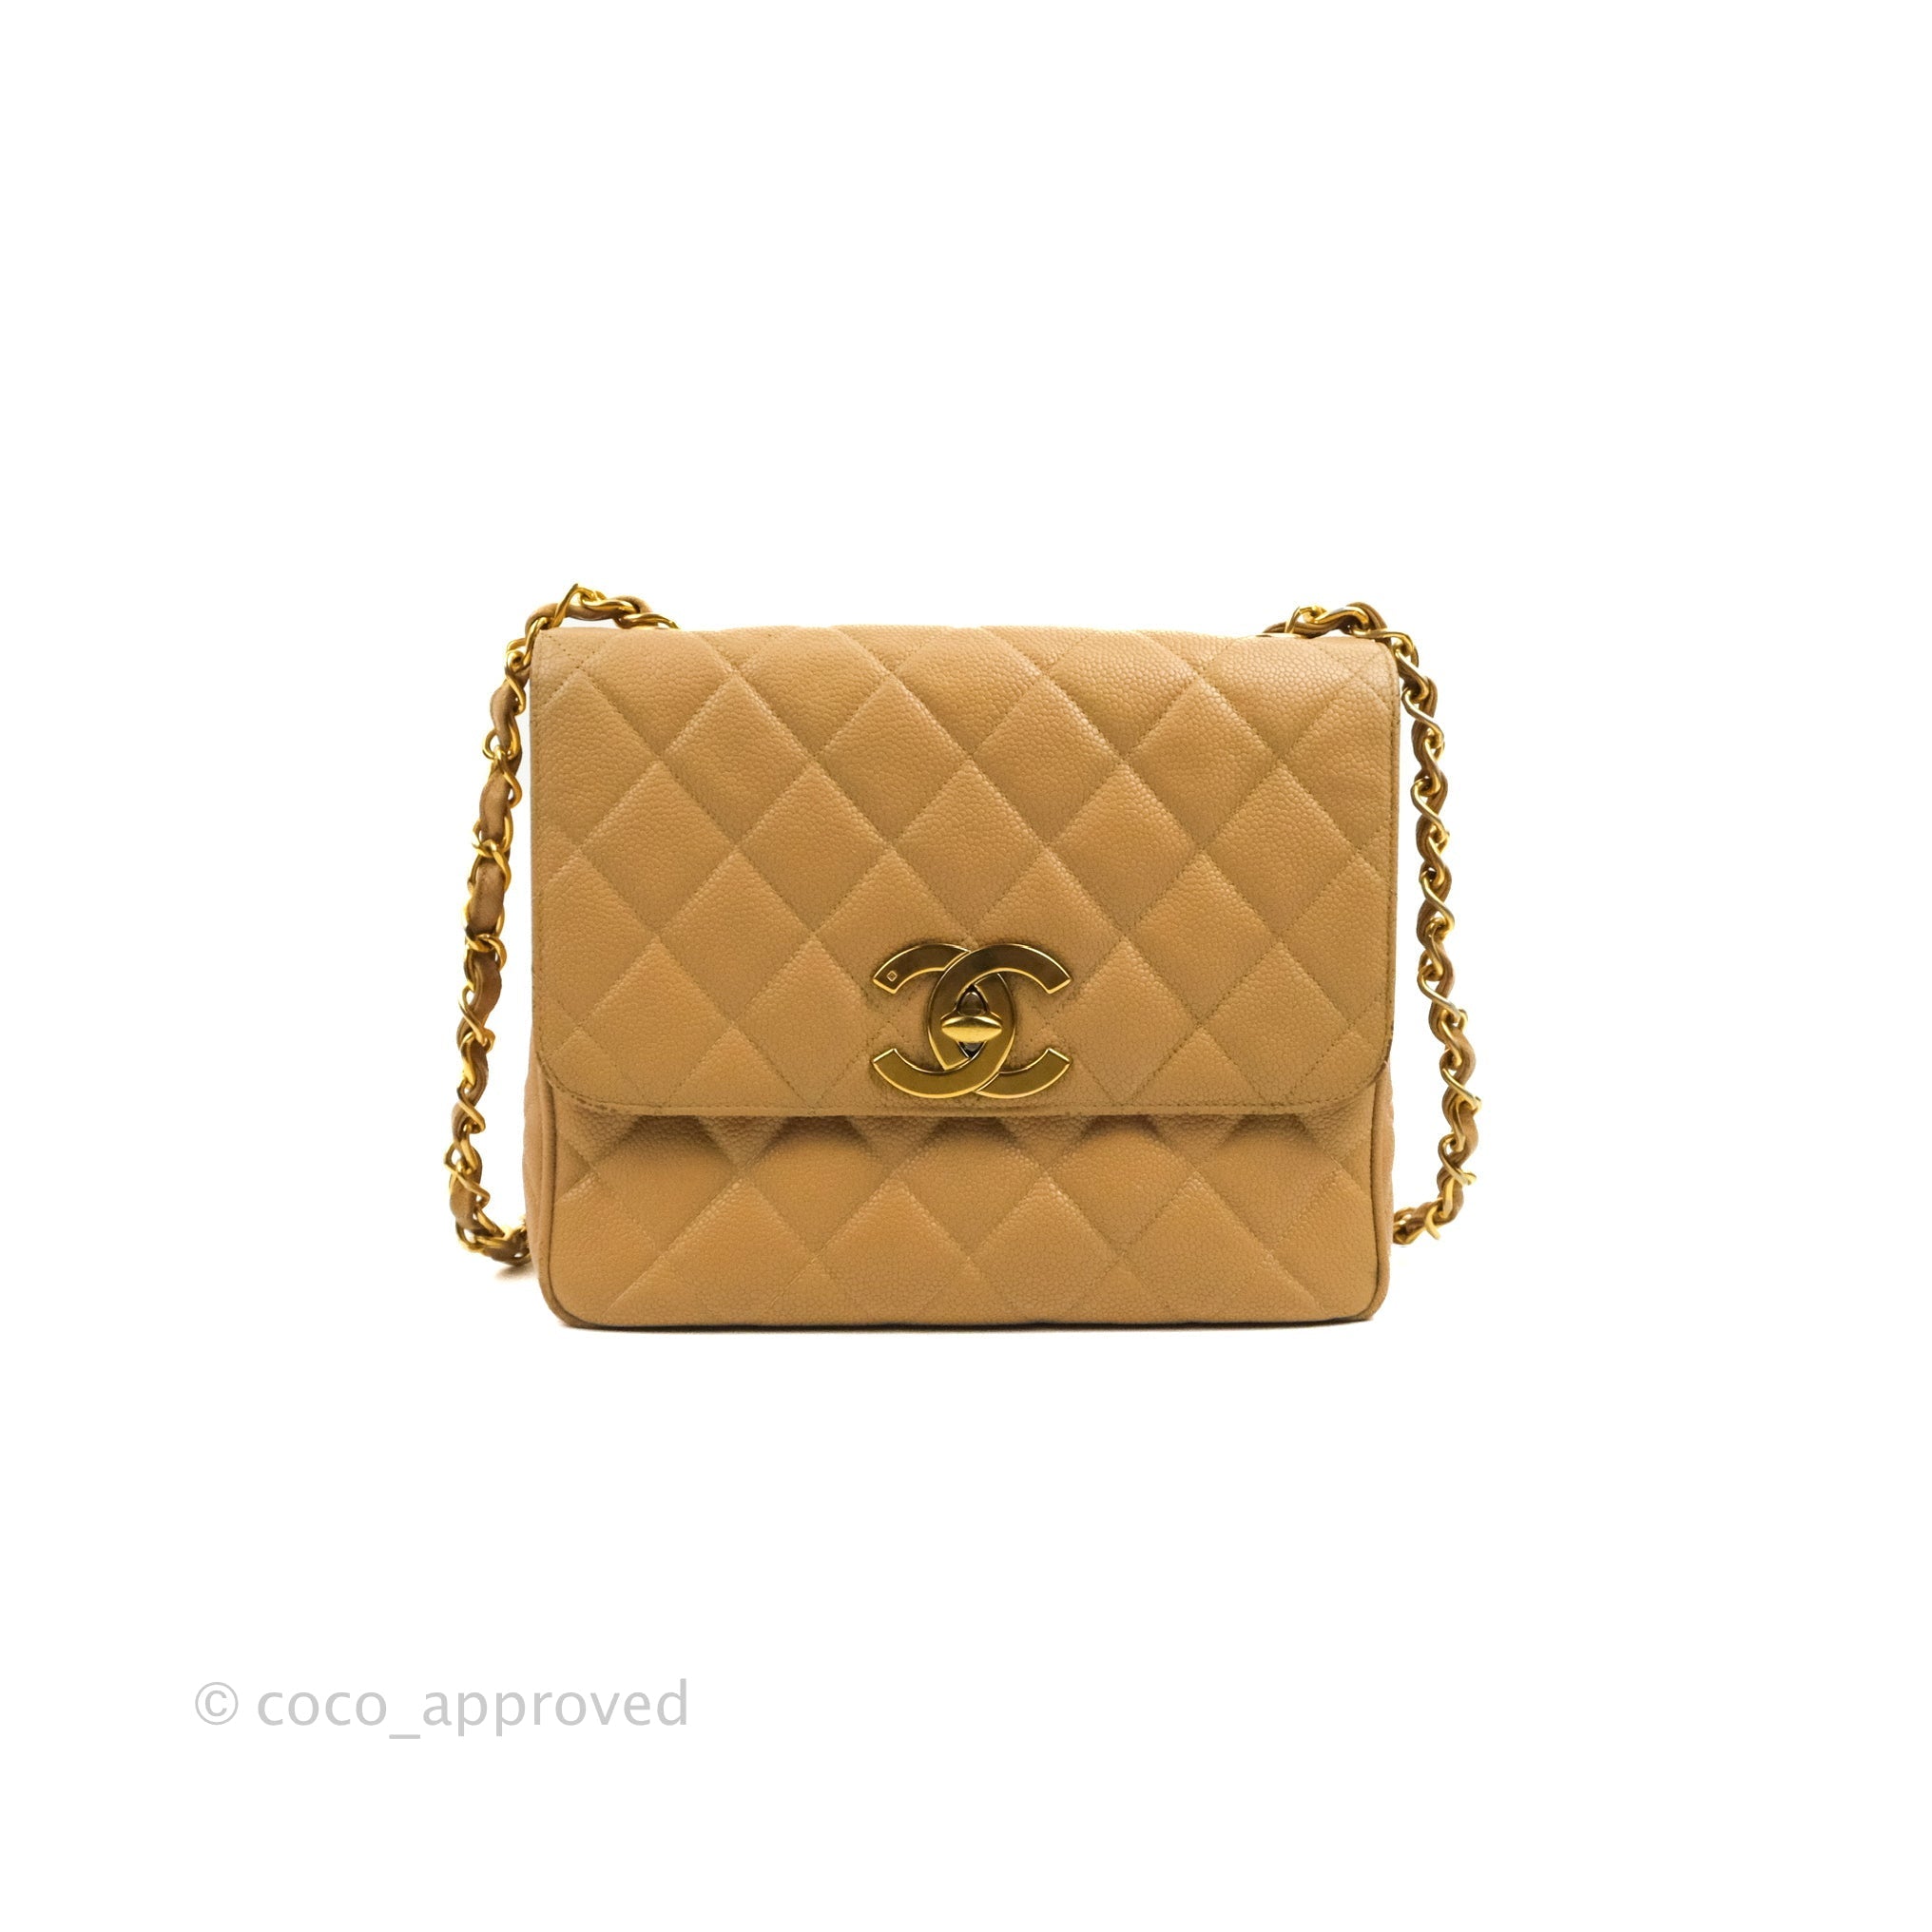 Sold at Auction: Vintage CHANEL beige calf leather large chain